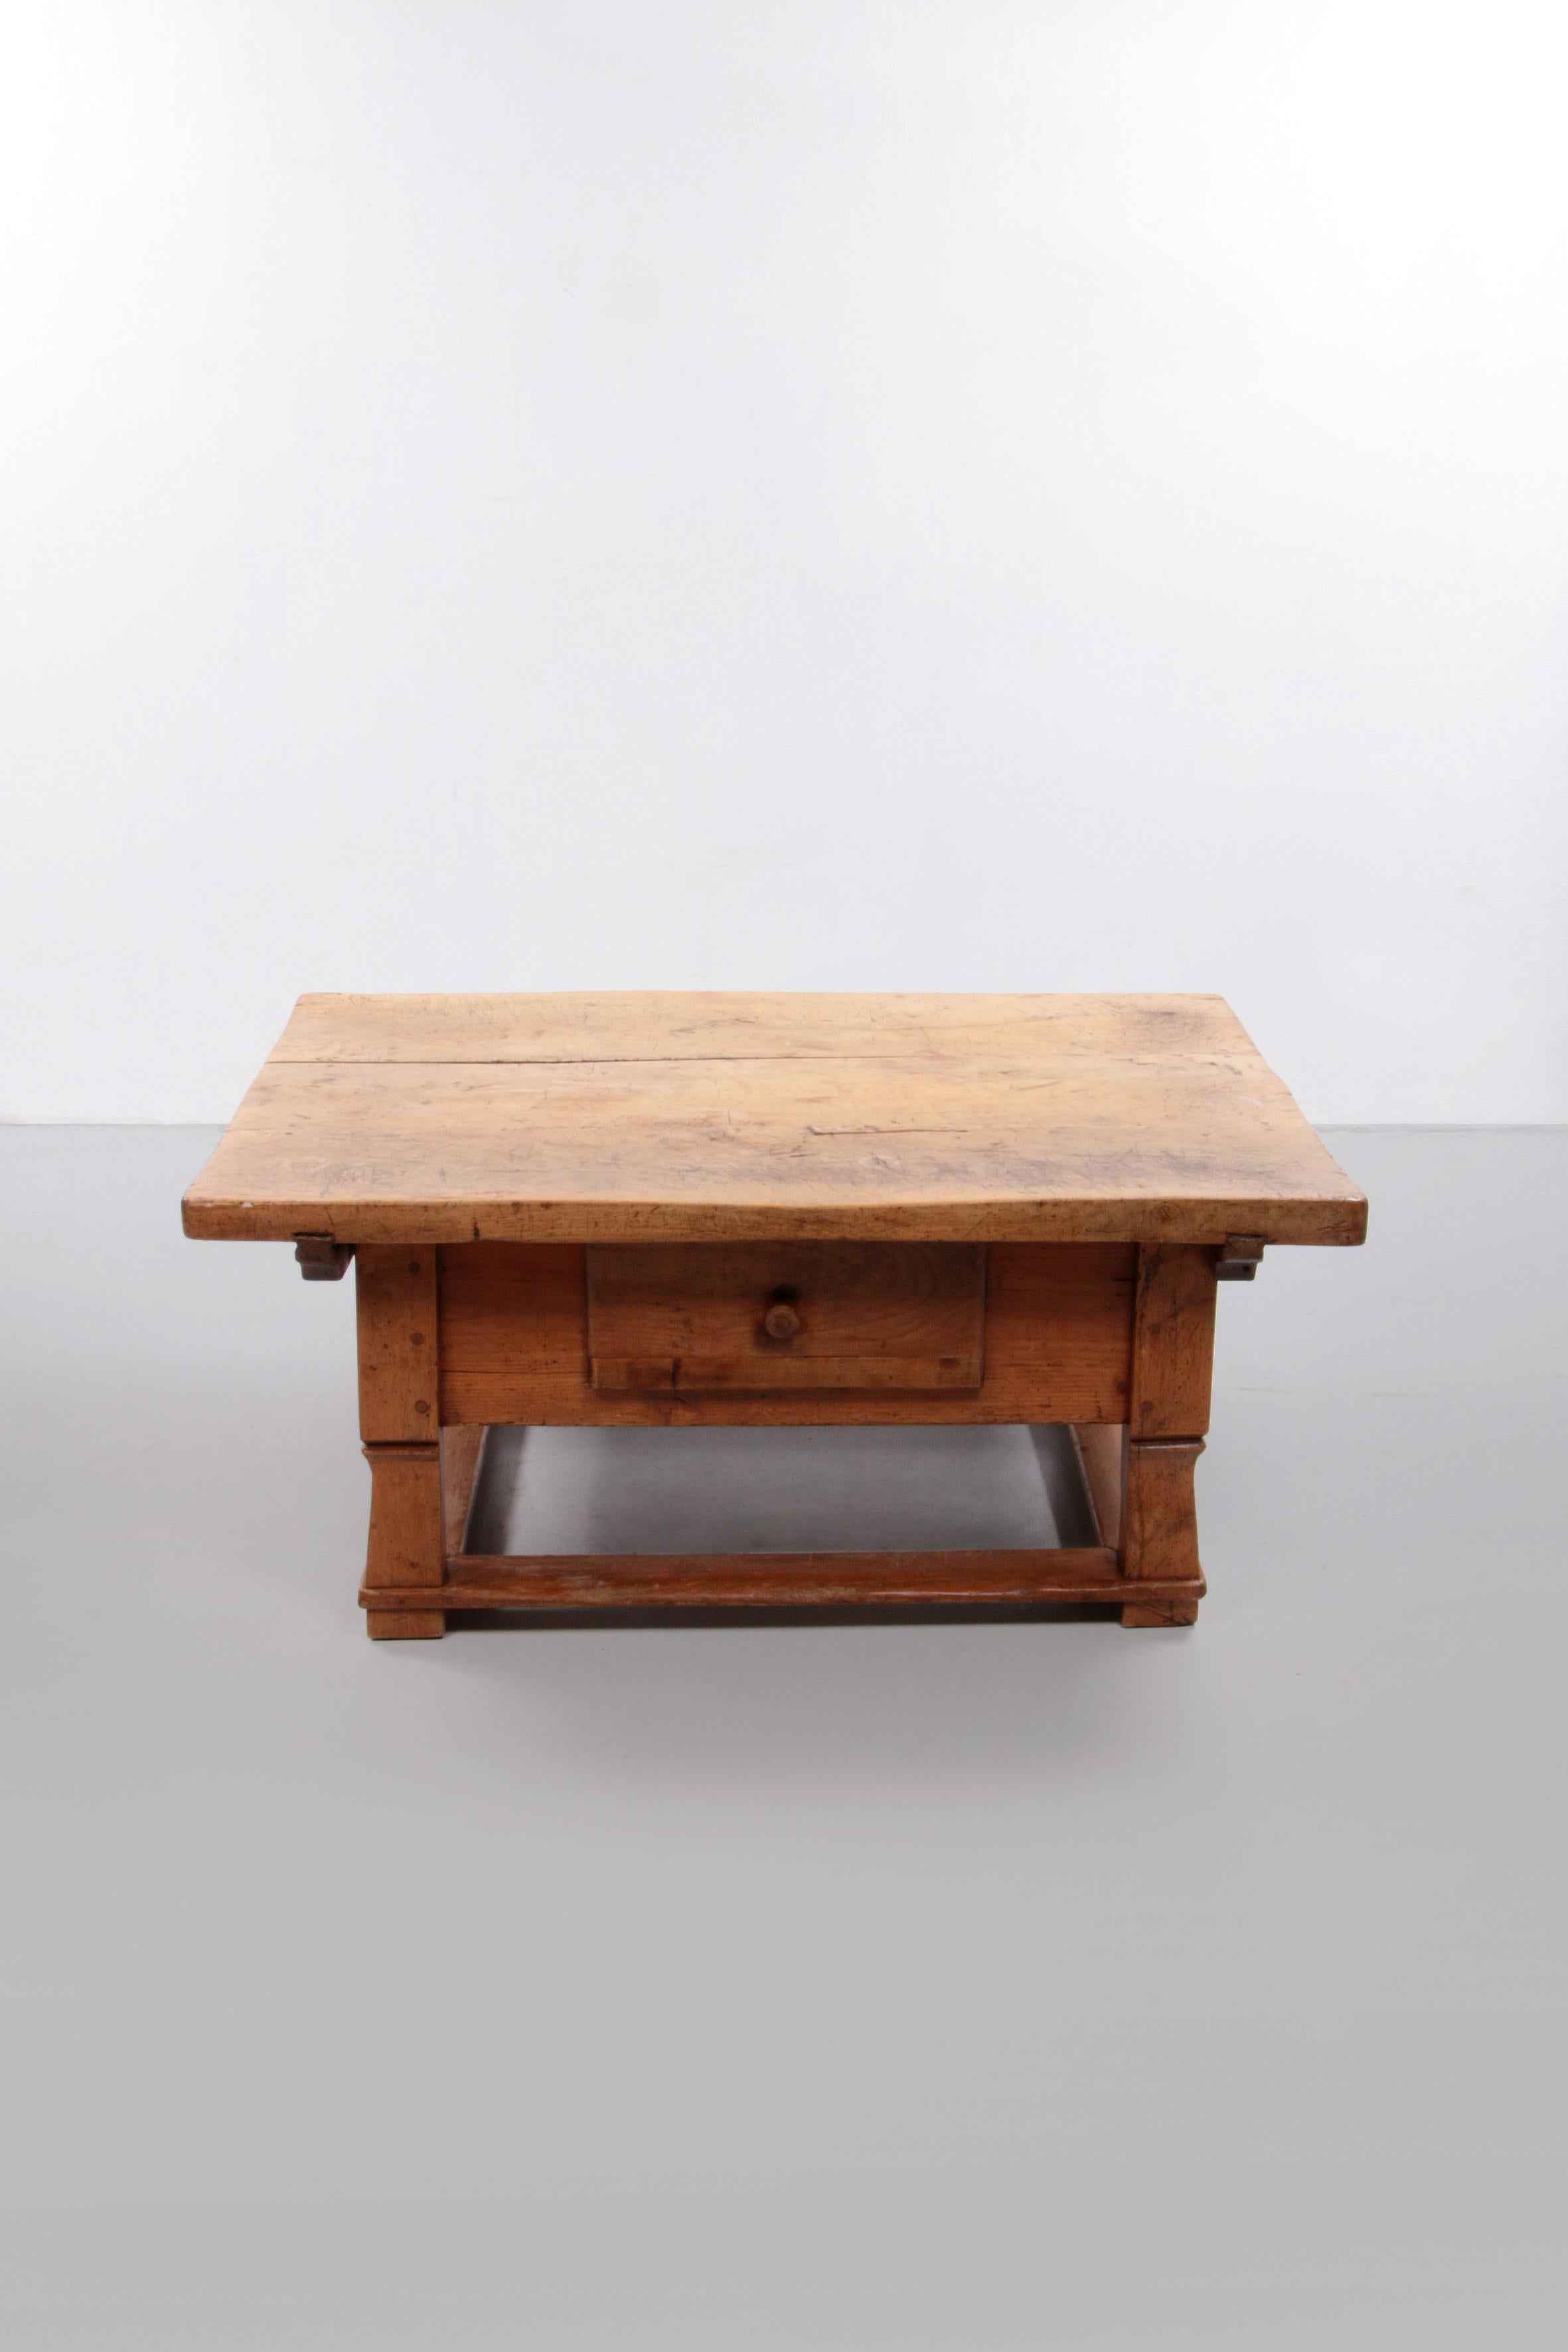 Austrian coffee table 19th century Walnut payment table with drawer, Austria.


An original 18/19th century pay table from Austria with 4 cm walnut table top. thickness. The table also contains a large drawer. The table top has a beautiful patina